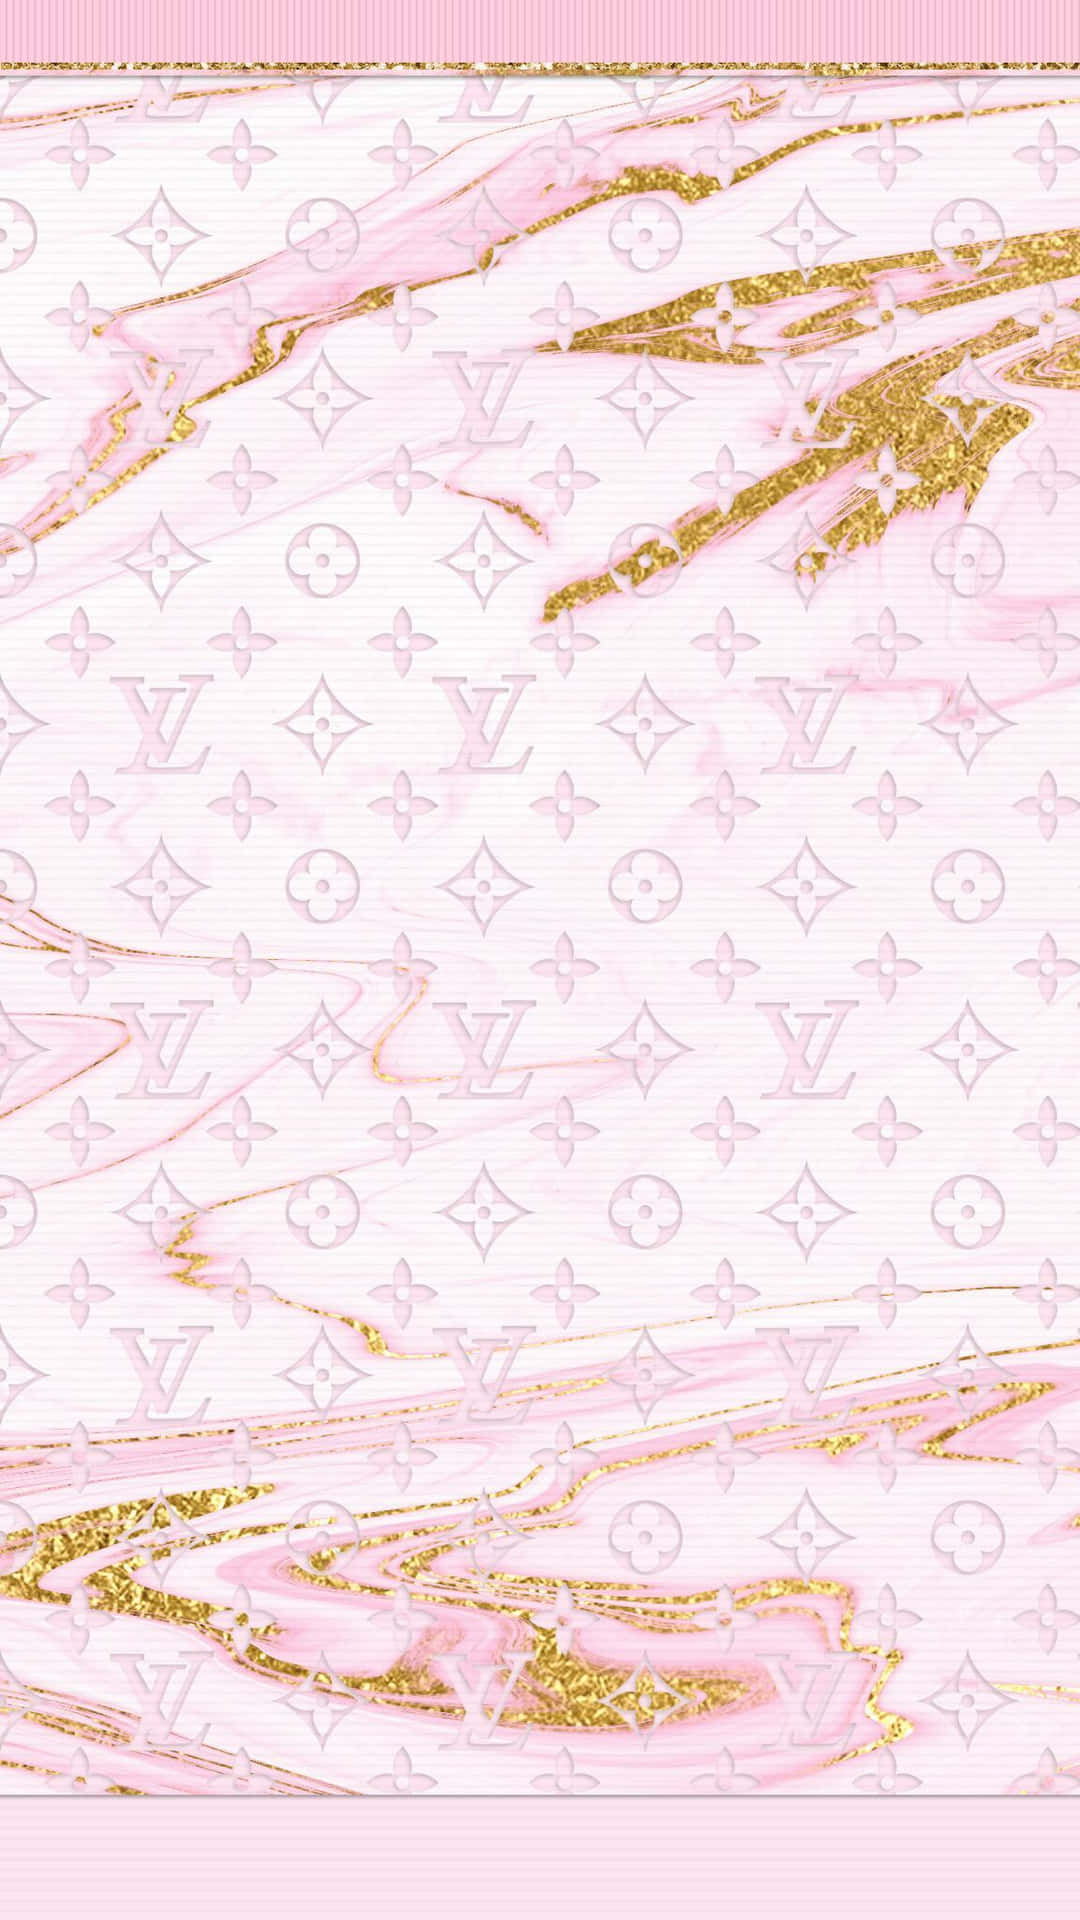 Accessorize In Style With Louis Vuitton's Iphone Background